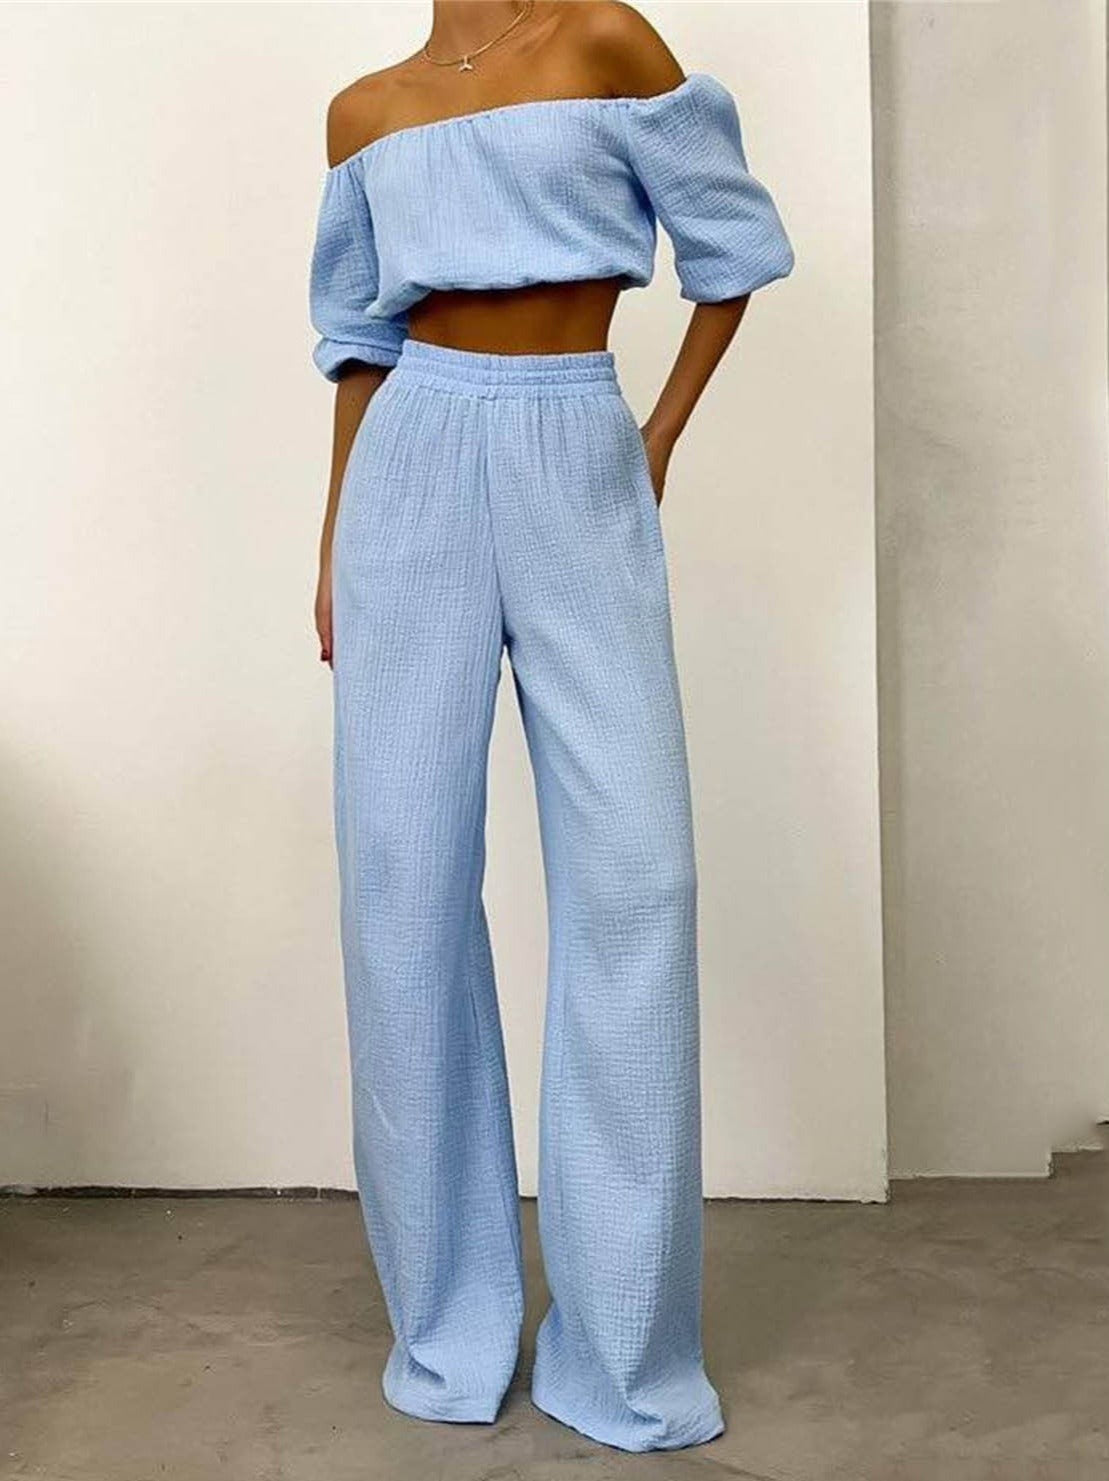 NTG Fad SUIT light blue / S One word collar top + casual straight pants set